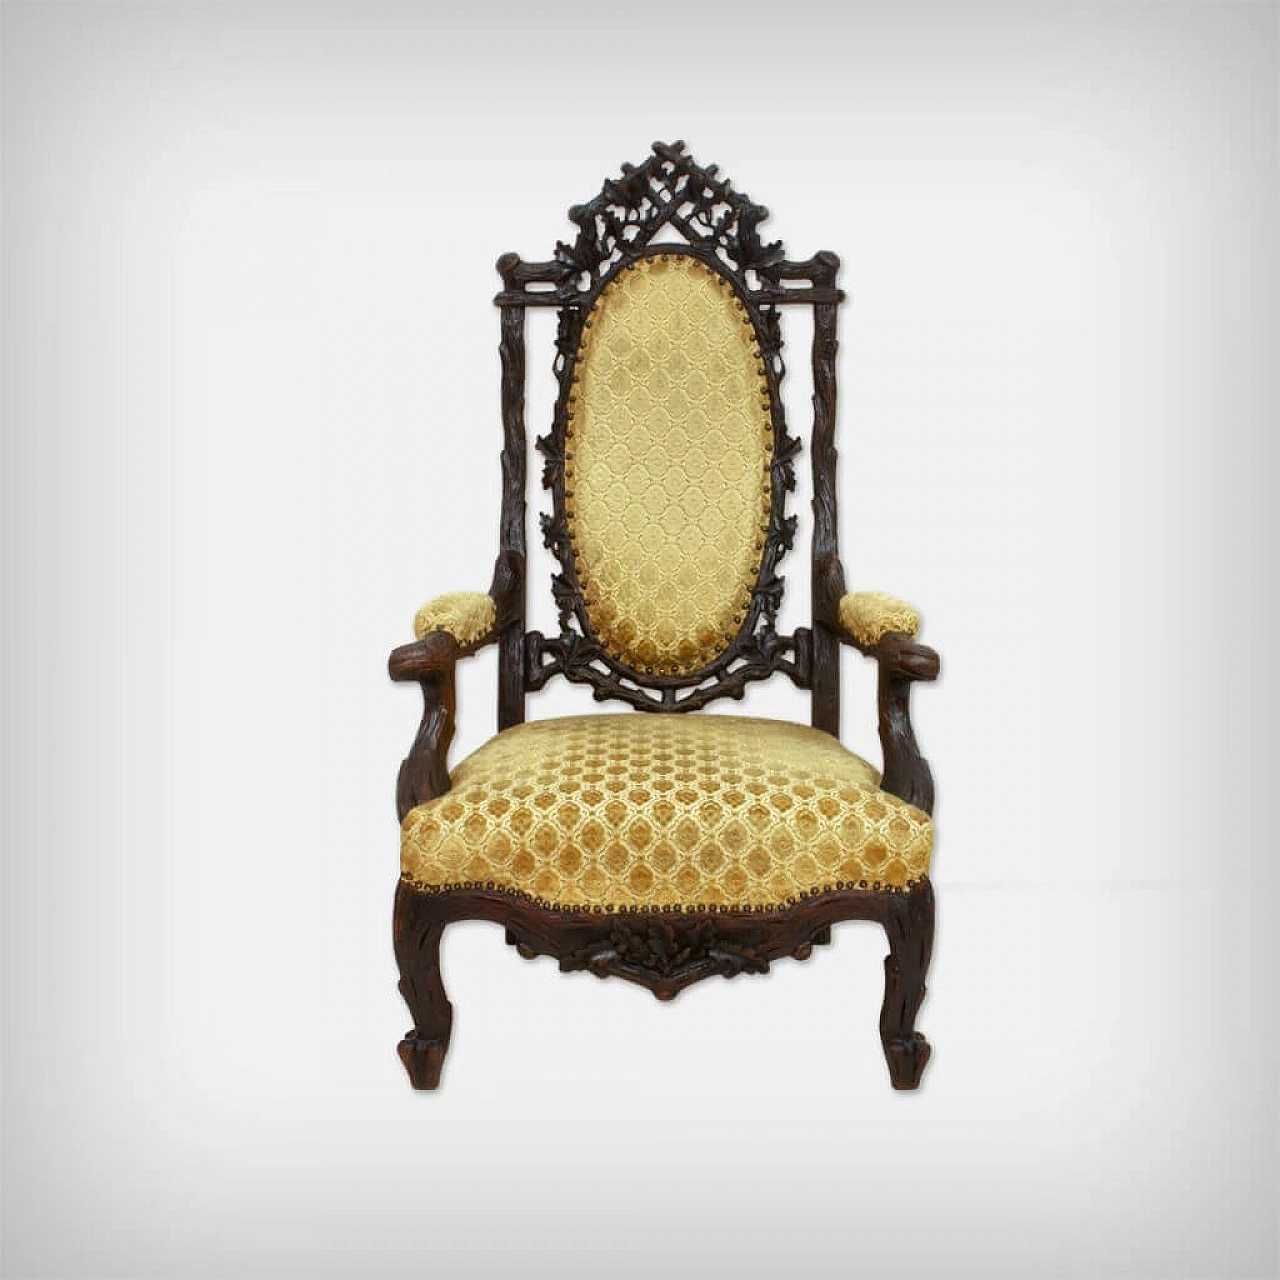 Dutch Black Forest style armchair in walnut and velvet by Gebroeders Horrix, 19th century 1236014